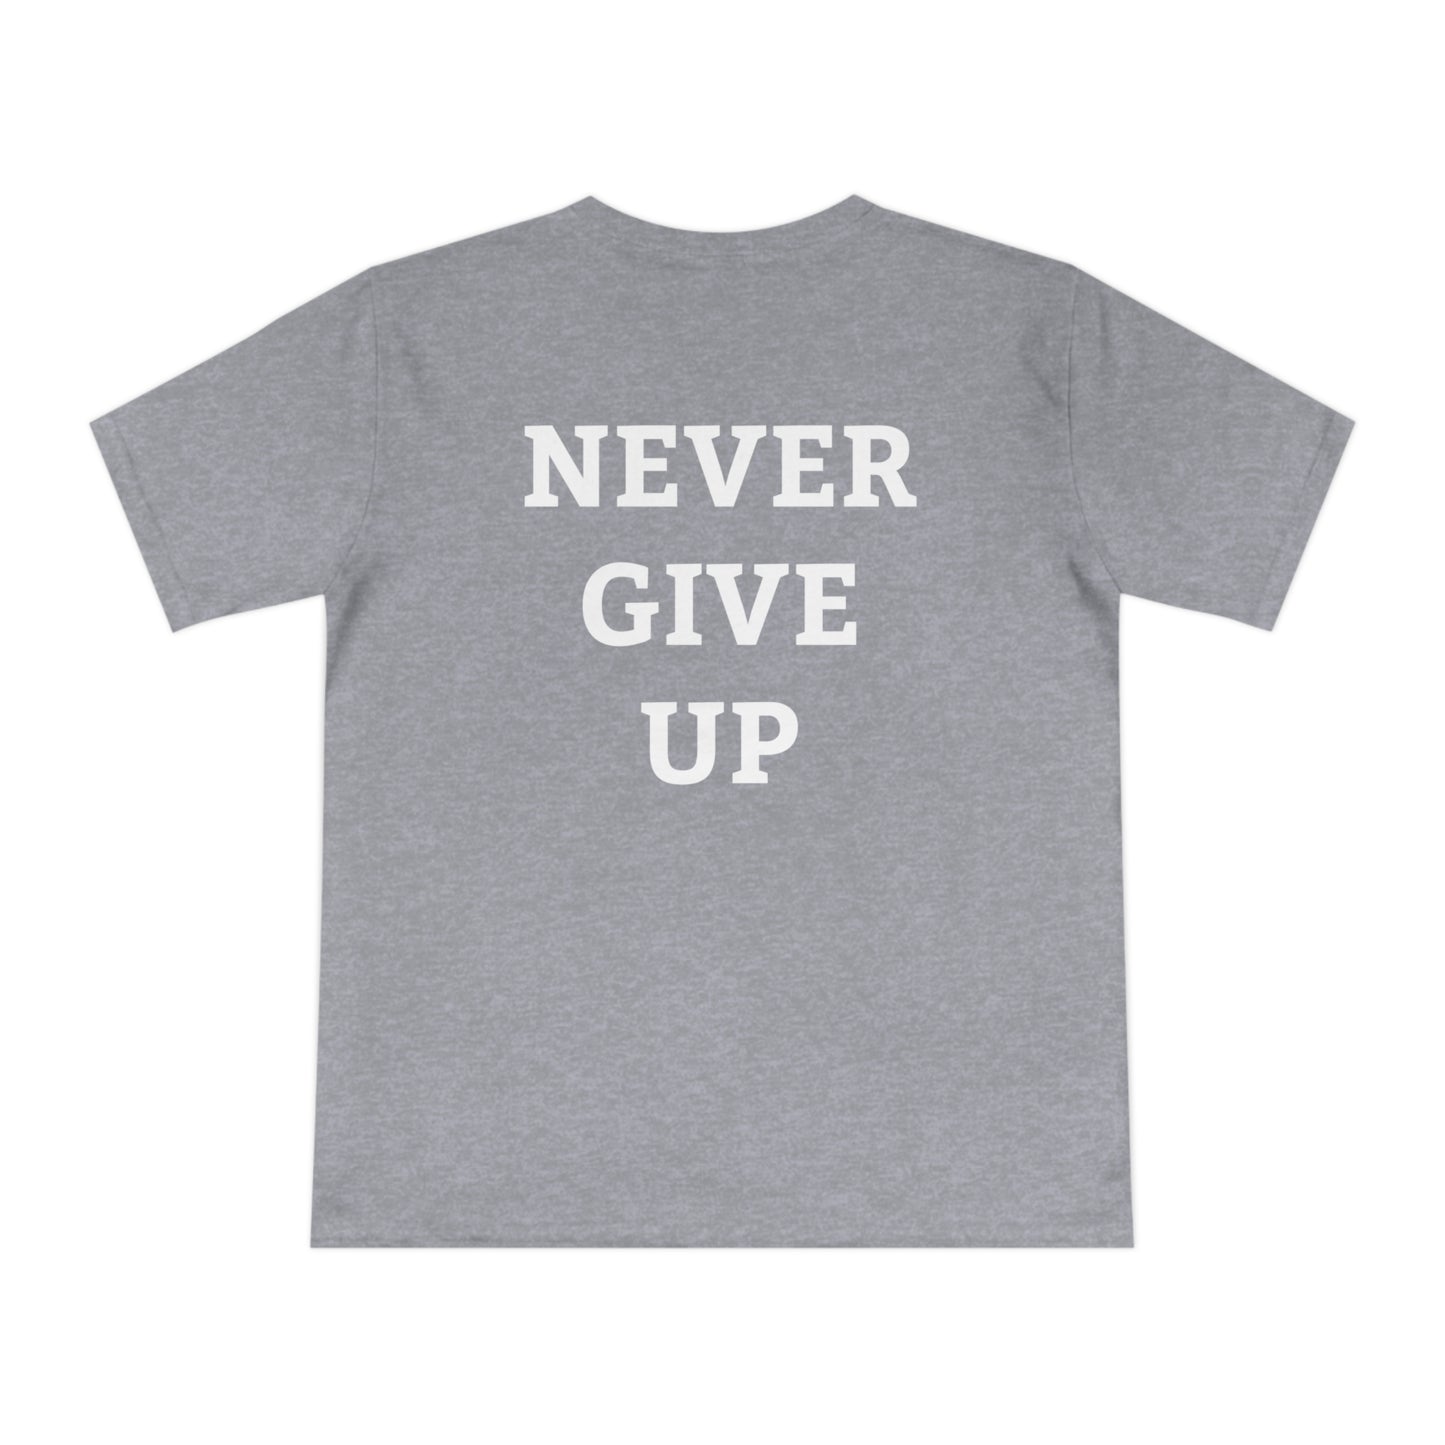 Motivation Quote T-Shirt Bio Homme - Never Give Up